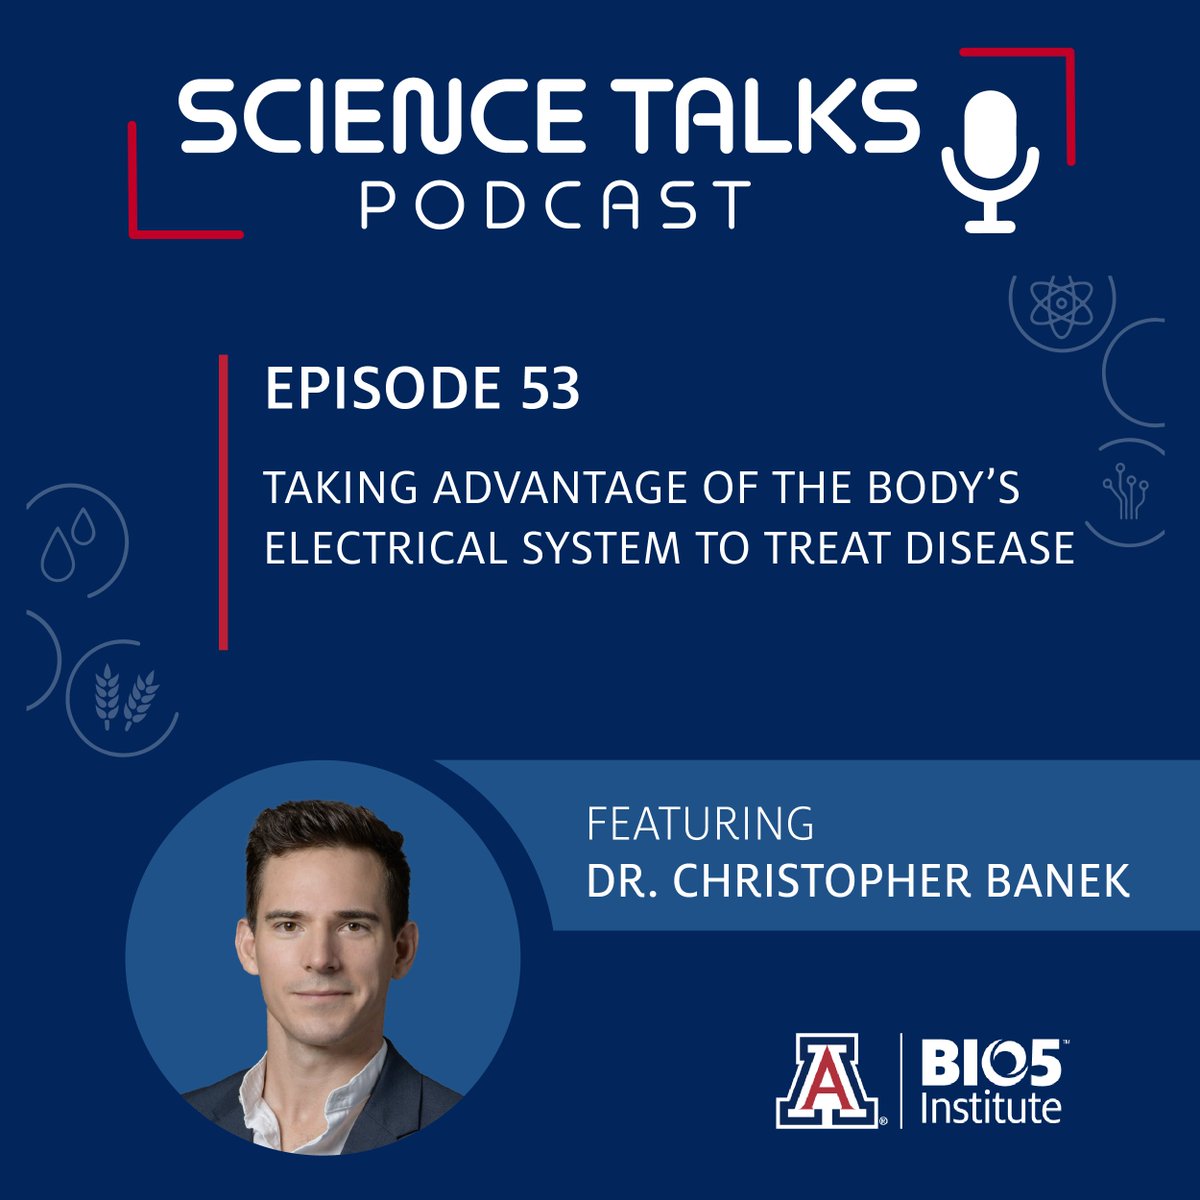 See how we can manipulate the body's nervous system to treat cardiovascular & kidney disease in our latest podcast featuring @UAZMedTucson Dr. Christopher Banek @Banek_Lab: Taking advantage of the body’s electrical system to treat disease. Listen & read: bit.ly/3VPoWxT